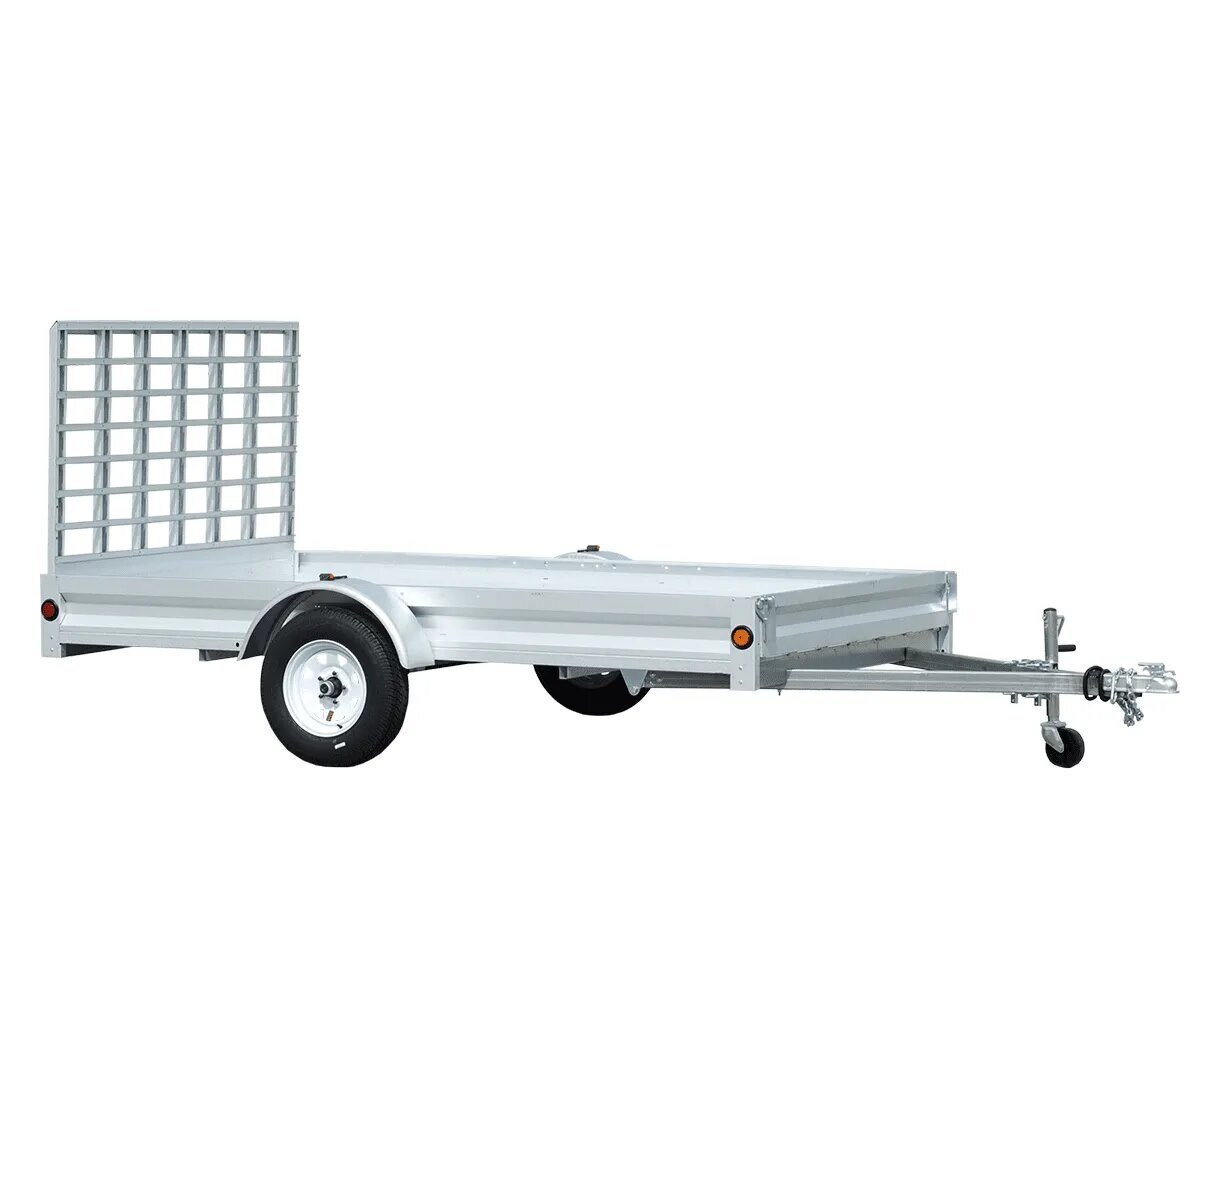 Westbrook 6' X 10' UTILITY TRAILER WITH XL LANDSCAPE RAMP GATE BY STIRLING